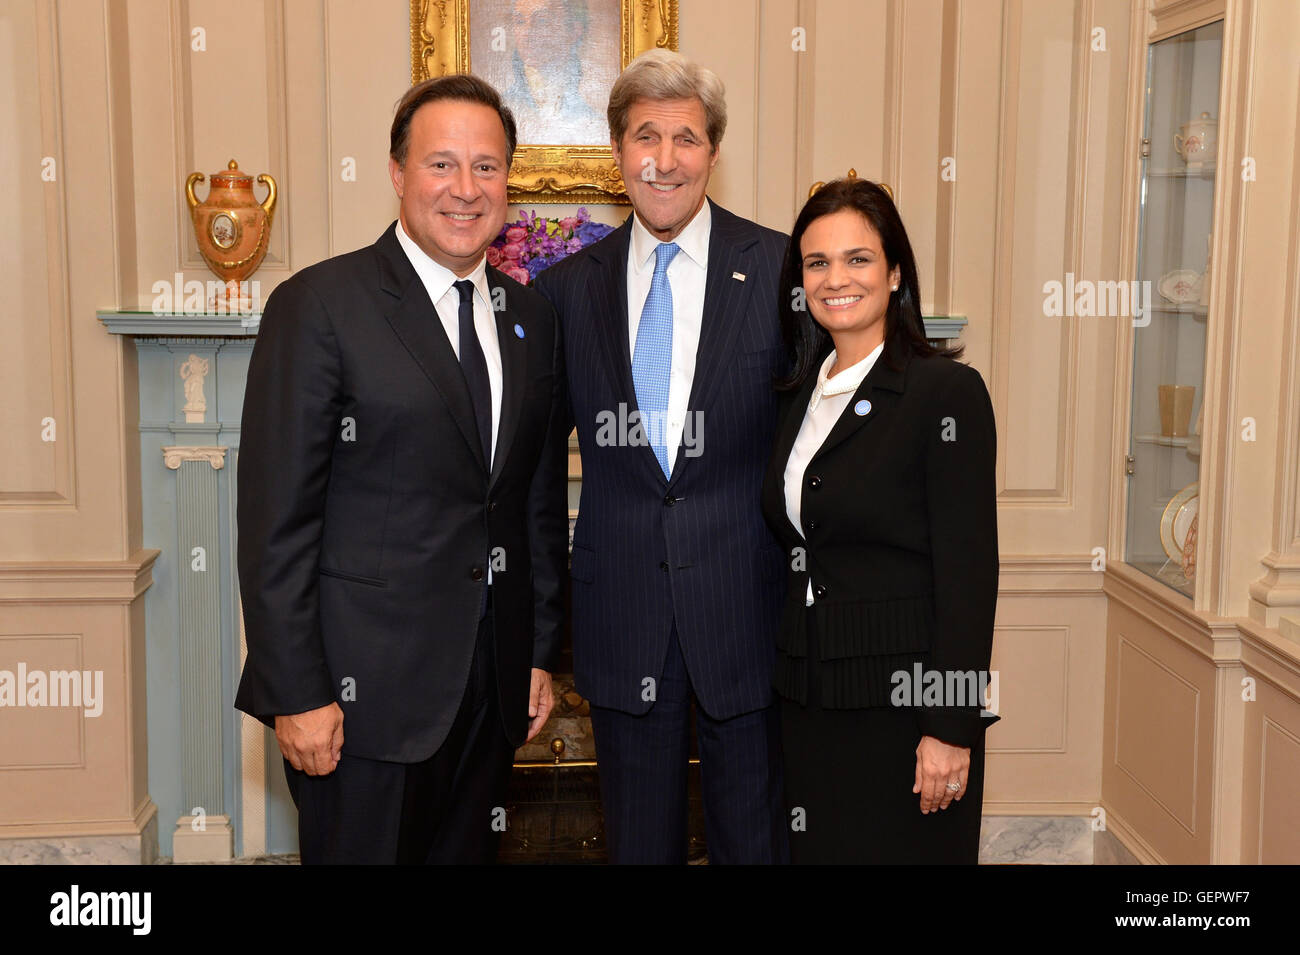 Secretary Kerry Poses for a Photo With Panamanian President Varela and Vice President Saint Malo Before Addressing a Joint Reception in Honor of the 46th Annual Washington Conference on the Americas and the U.S.-Caribbean-Central American Energy Summit Stock Photo